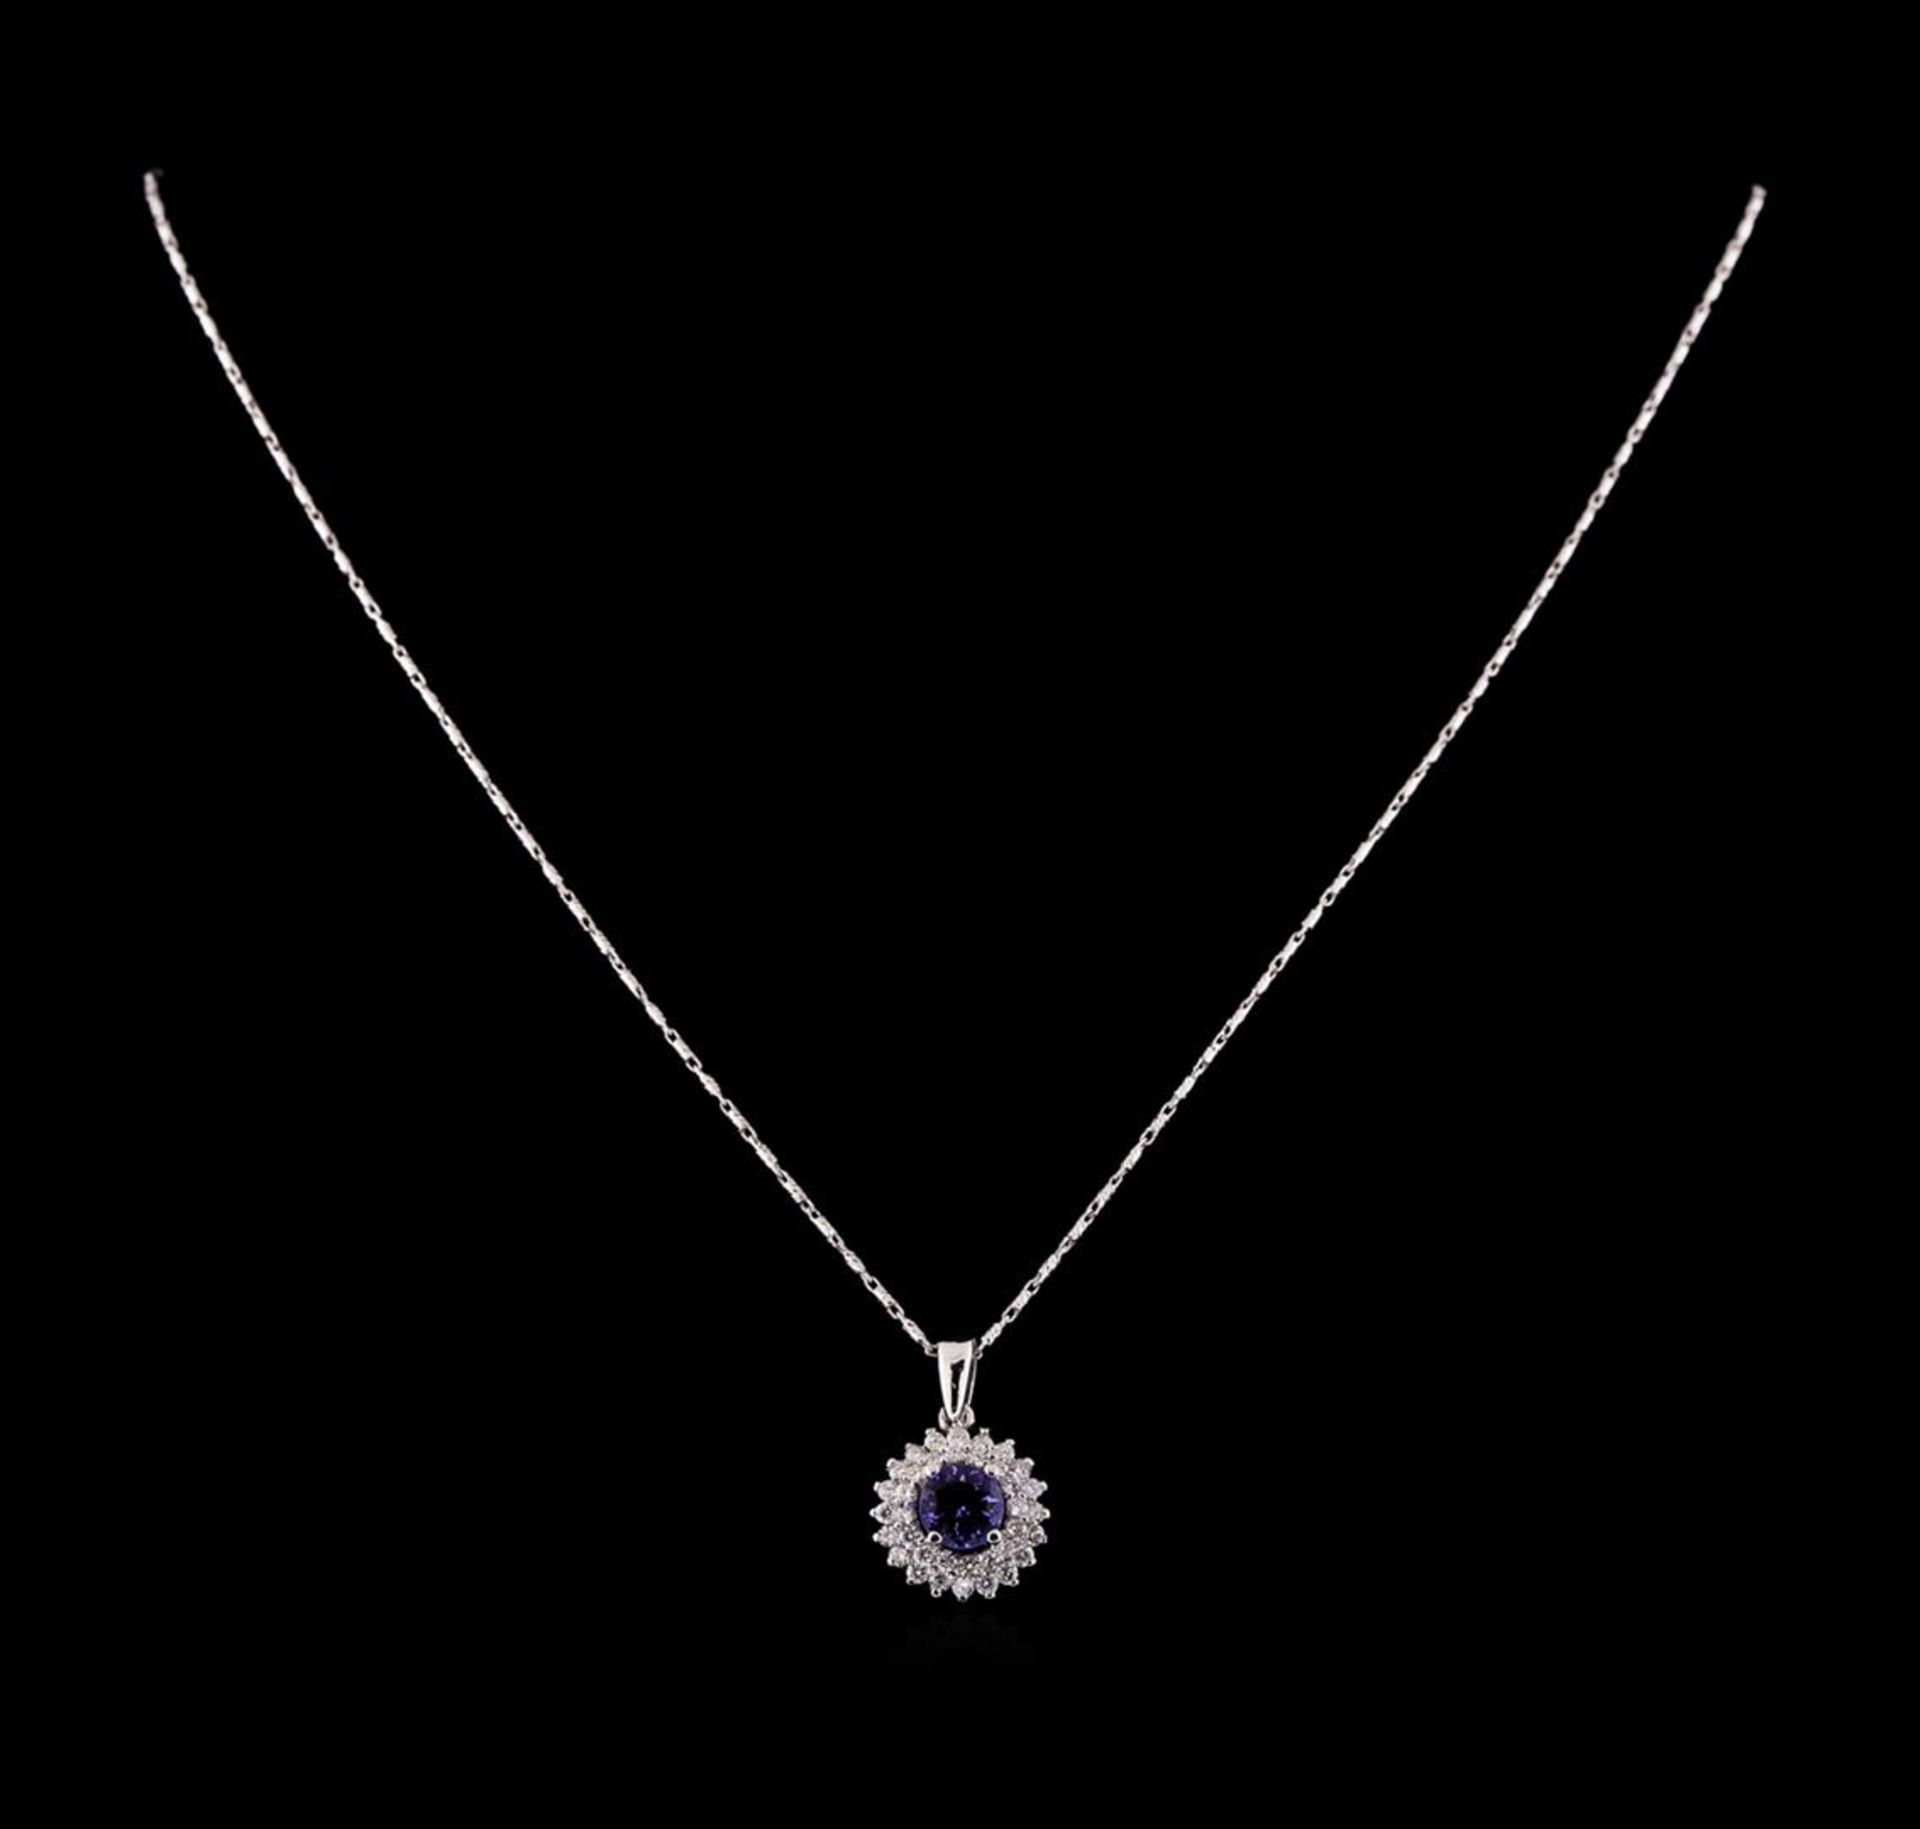 14KT White Gold 1.22 ctw Tanzanite and Diamond Pendant With Chain - Image 2 of 3